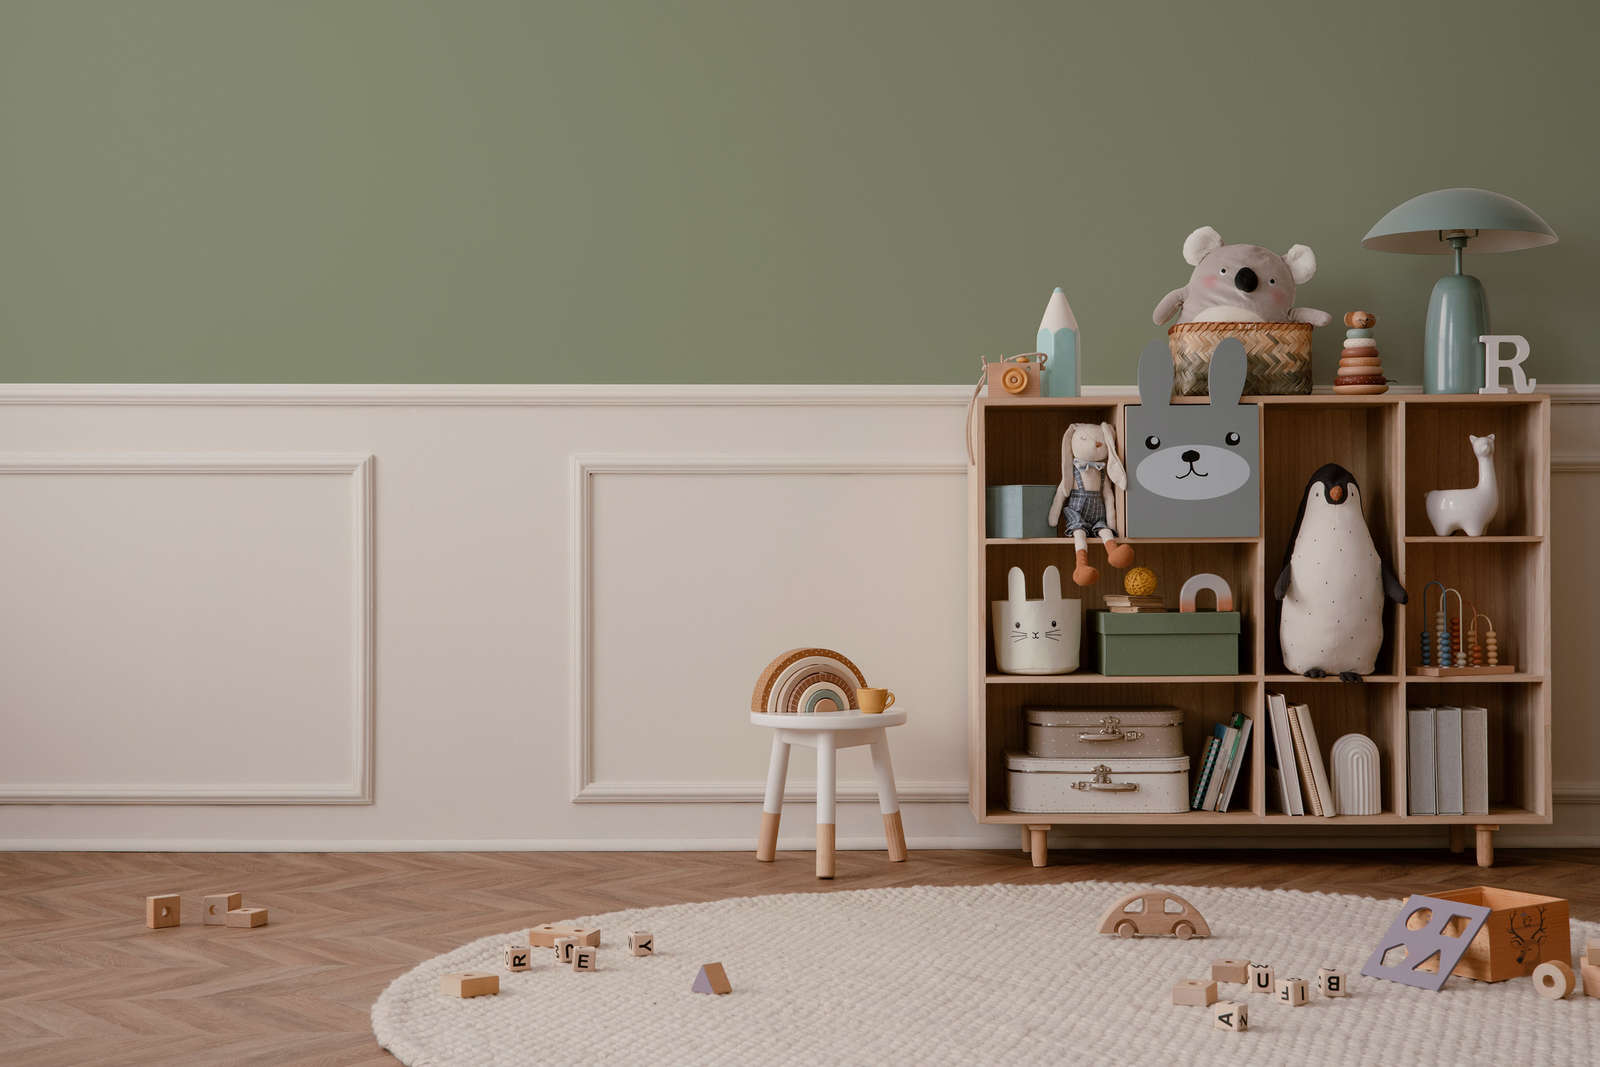             Premium Wall Paint Earthy Olive Green »Gorgeous Green« NW502 – 2.5 litre
        